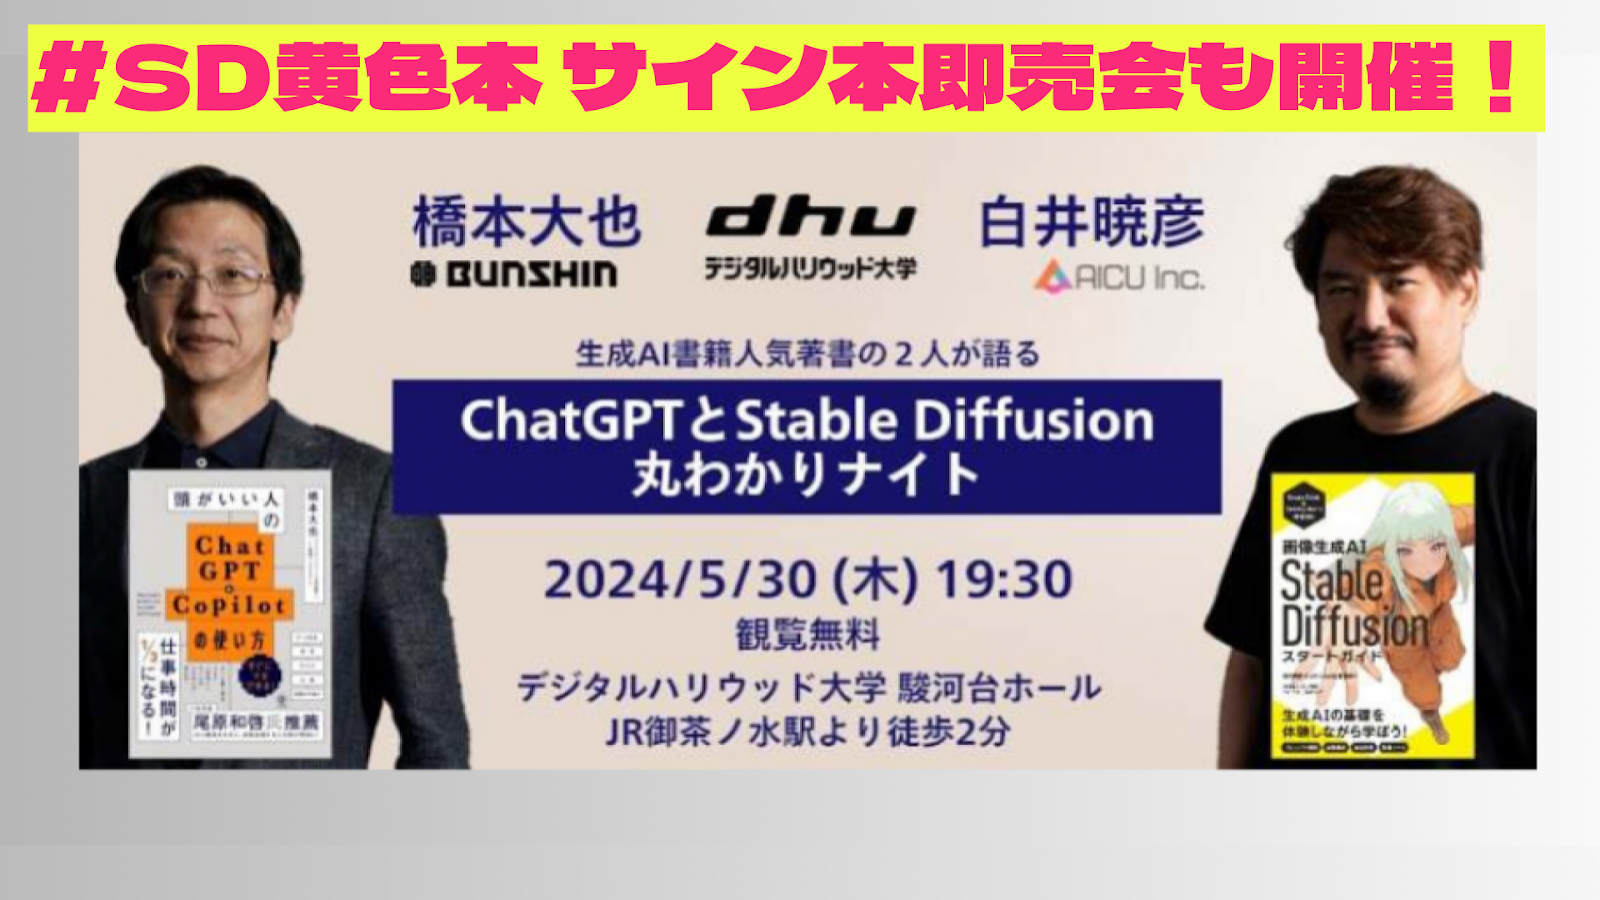 「ChatGPTとStable Diffusion丸わかりナイト」